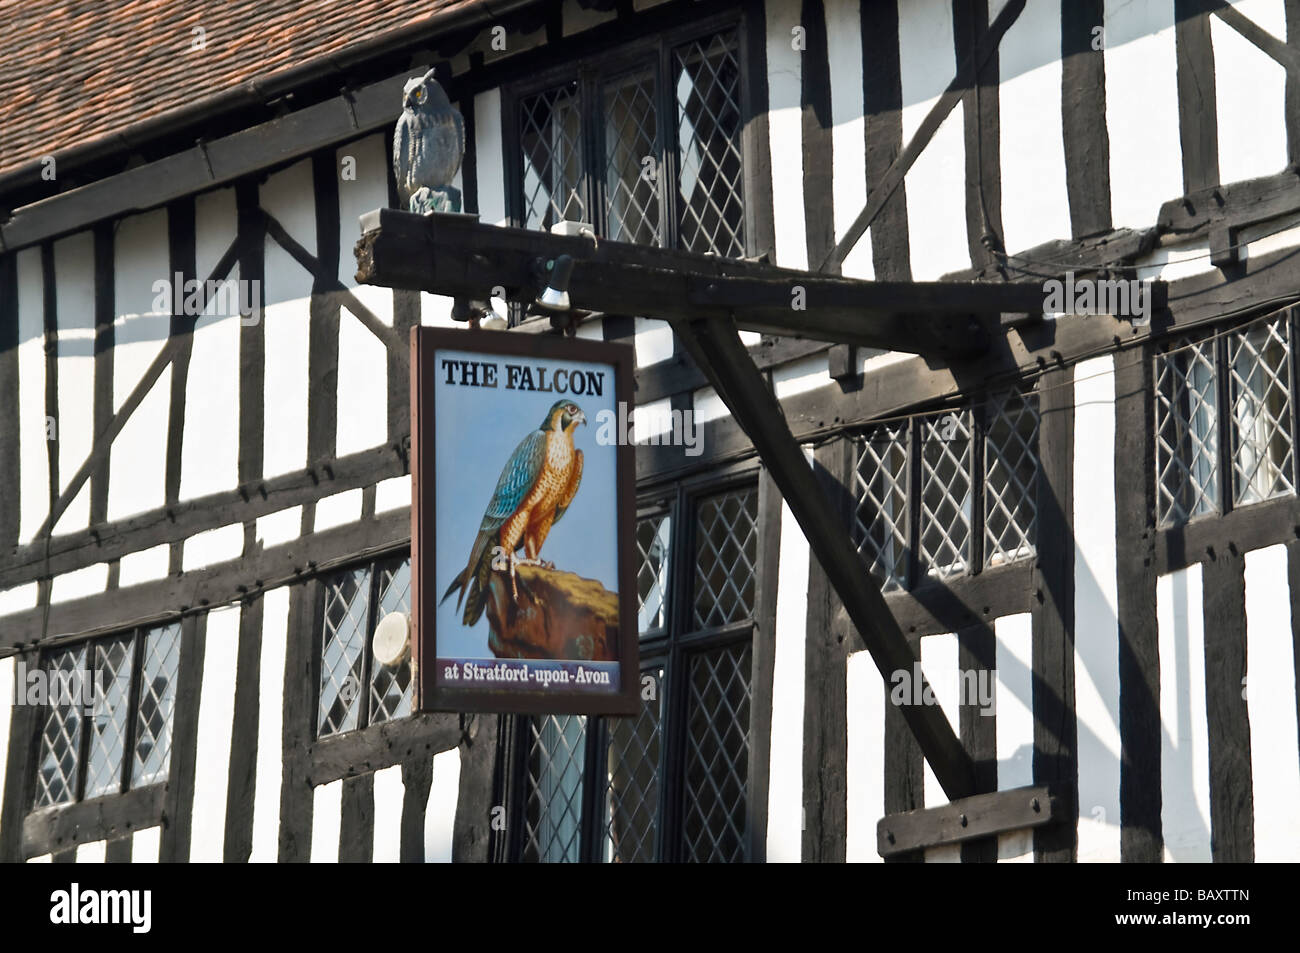 Horizontal close up of an old black and white Tudor building with a decorative pub sign hanging outside on a bright sunny day Stock Photo